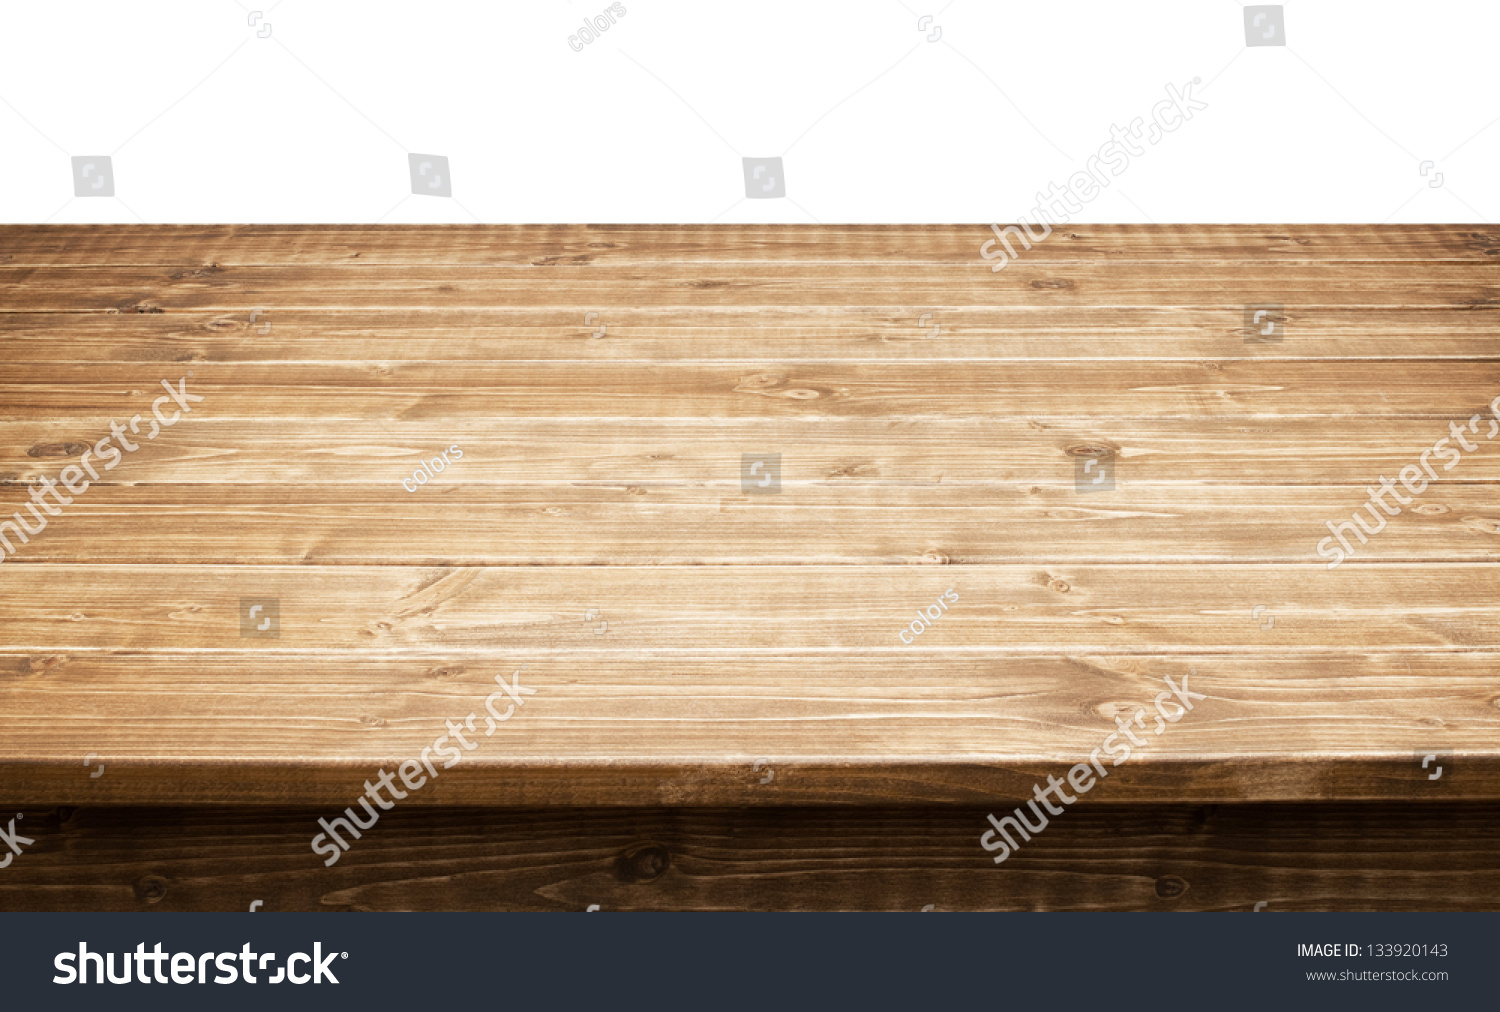 Empty wooden table top #133920143